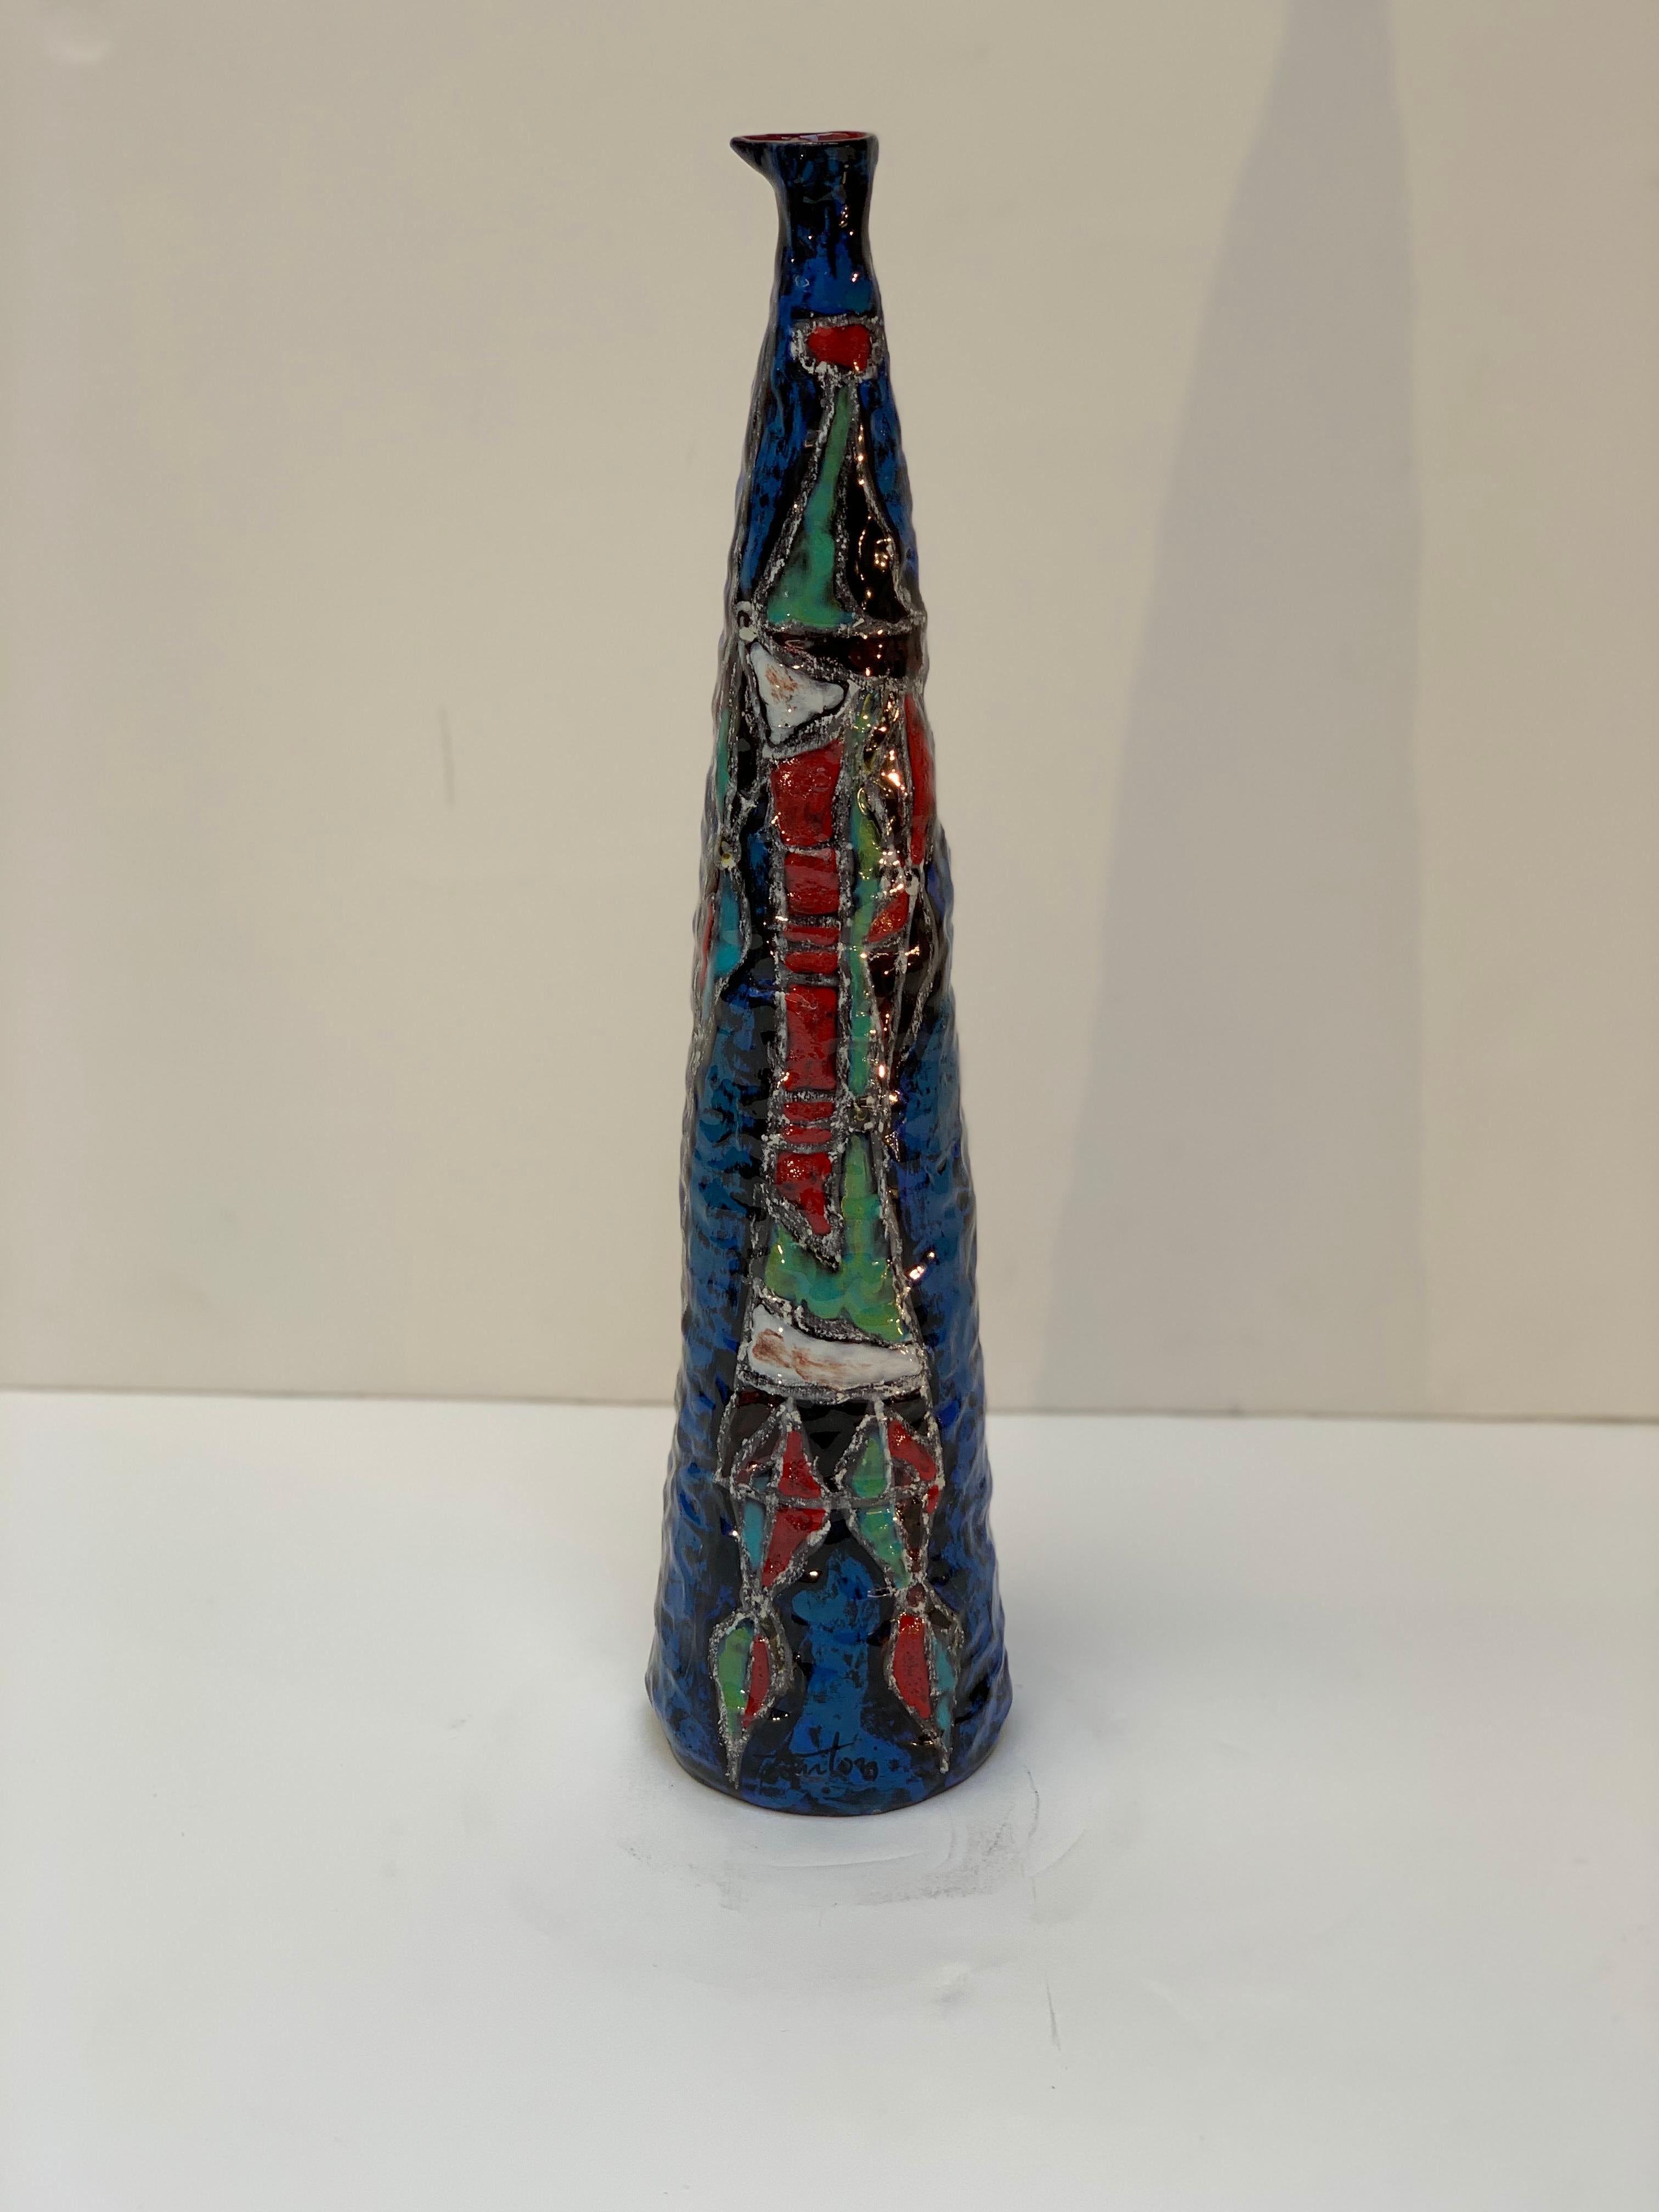 Rare ceramic vase by the master ceramist Marcello Fantoni Florence Italy circa 1956, beautiful blue background with decoration representing a multicolored warrior.
Asymmetric mouth with red interior.
Typical of the midcentury is the form and